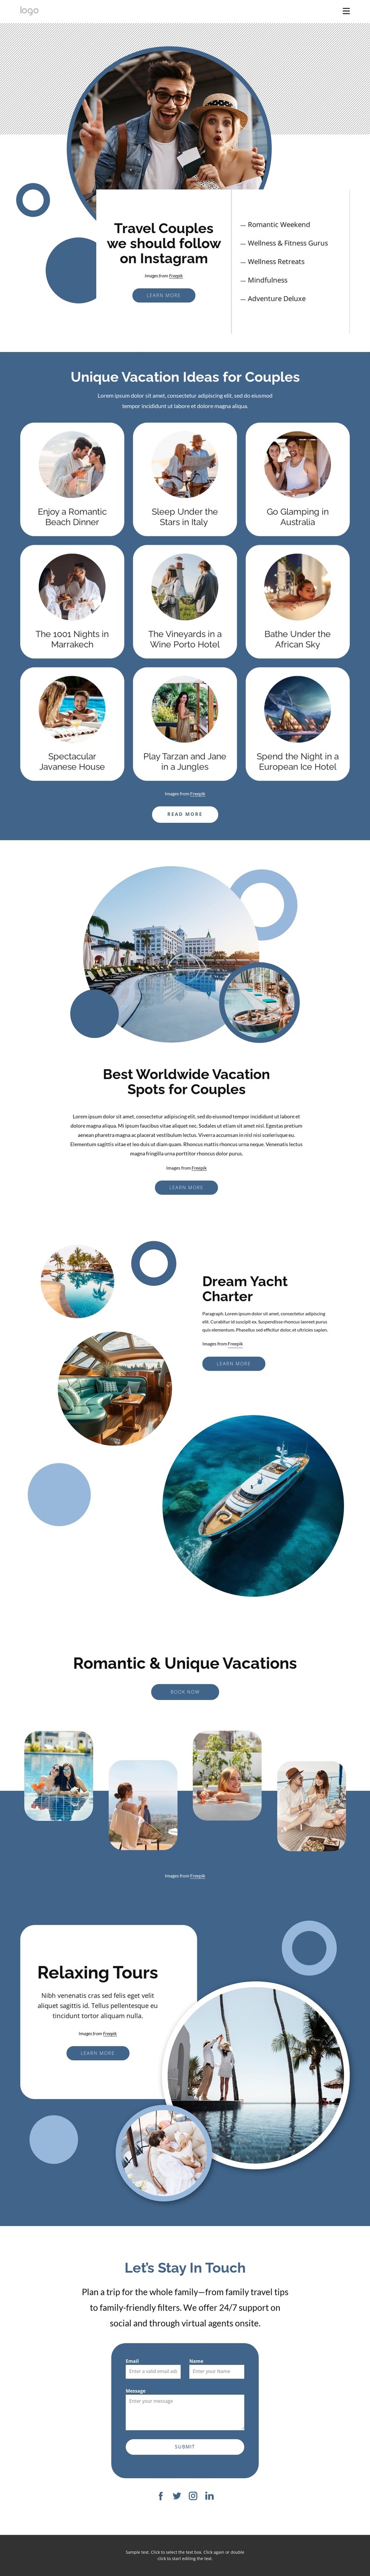 Imagine travelling to some of the most amazing places WordPress Theme